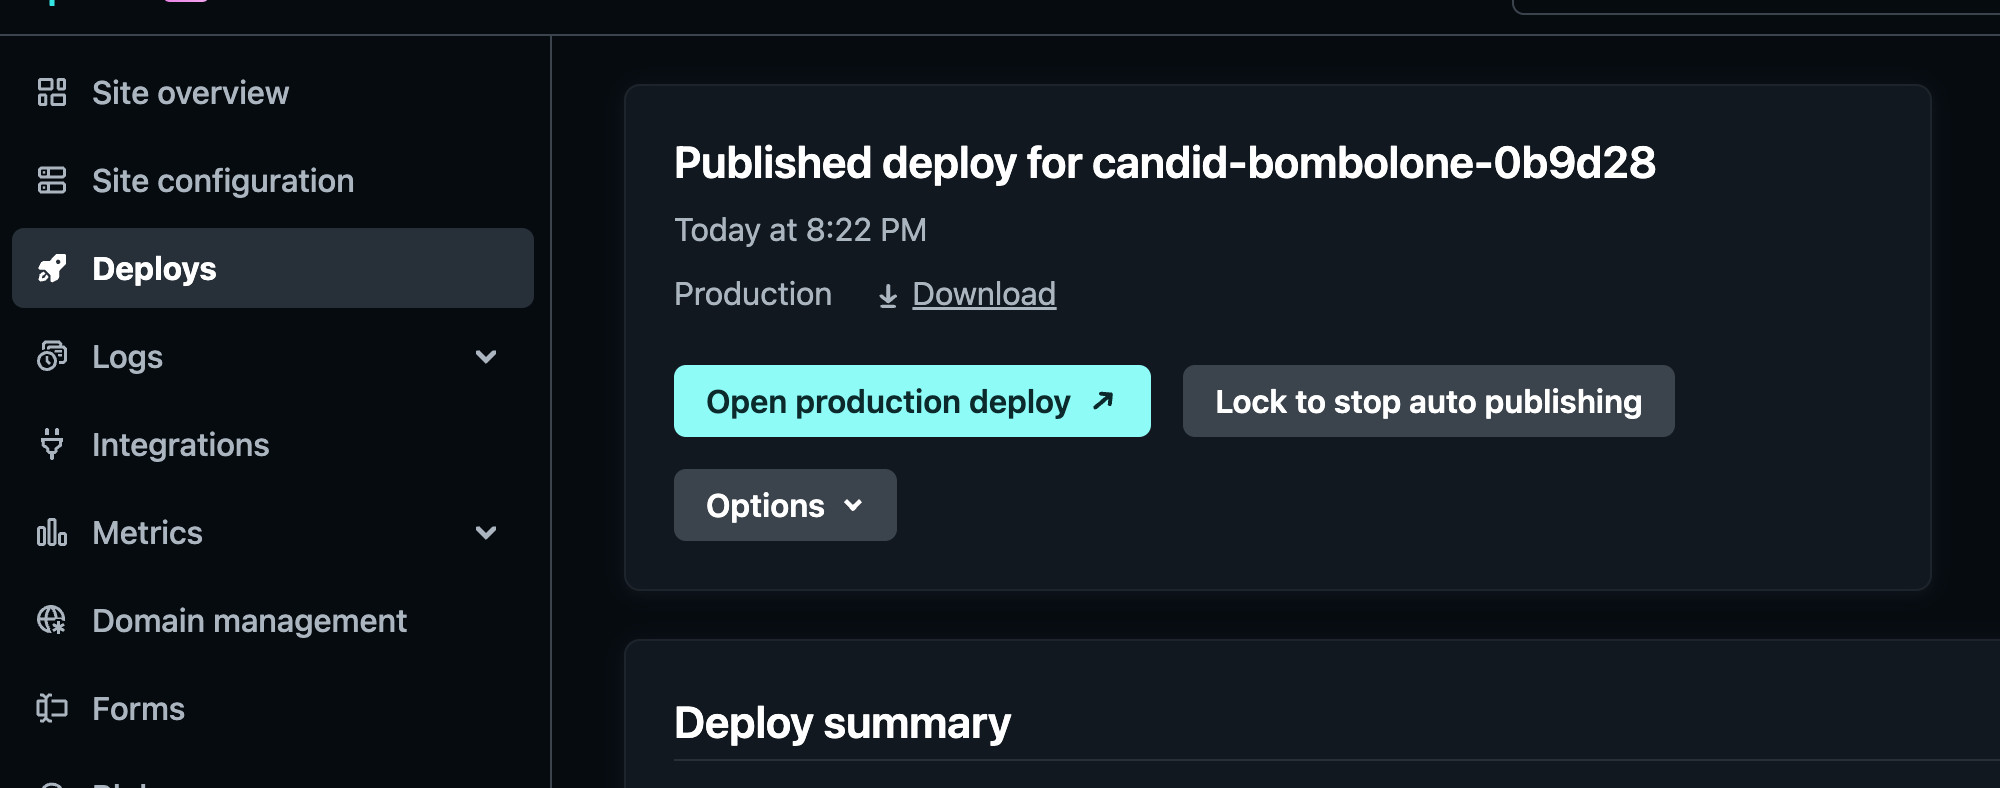 image of opening deploy